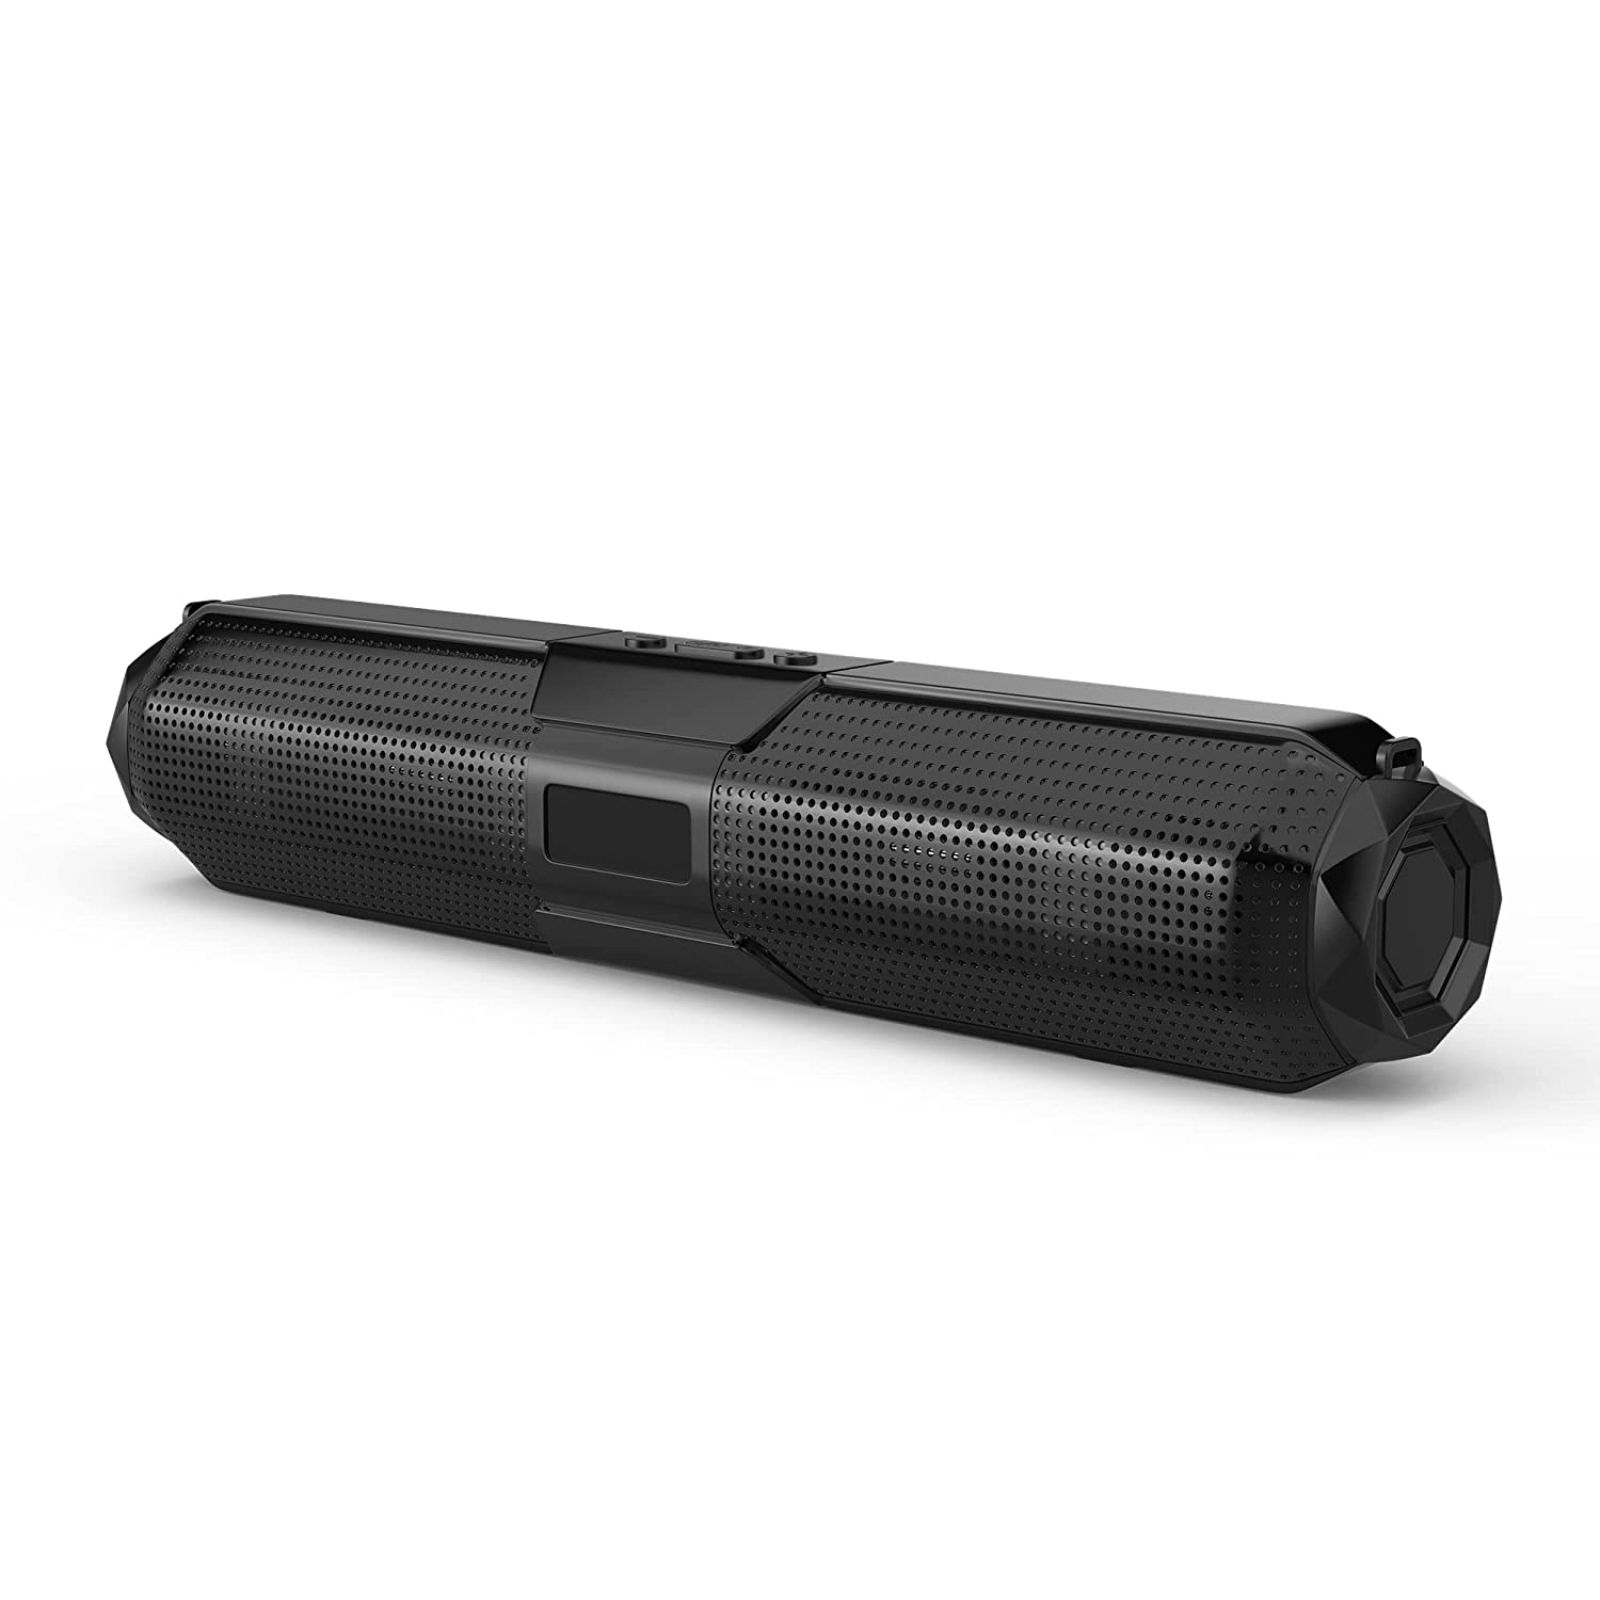     			VERONIC Sound Bar 10 W Bluetooth Speaker Bluetooth v5.0 with USB,SD card Slot,Aux Playback Time 6 hrs Assorted